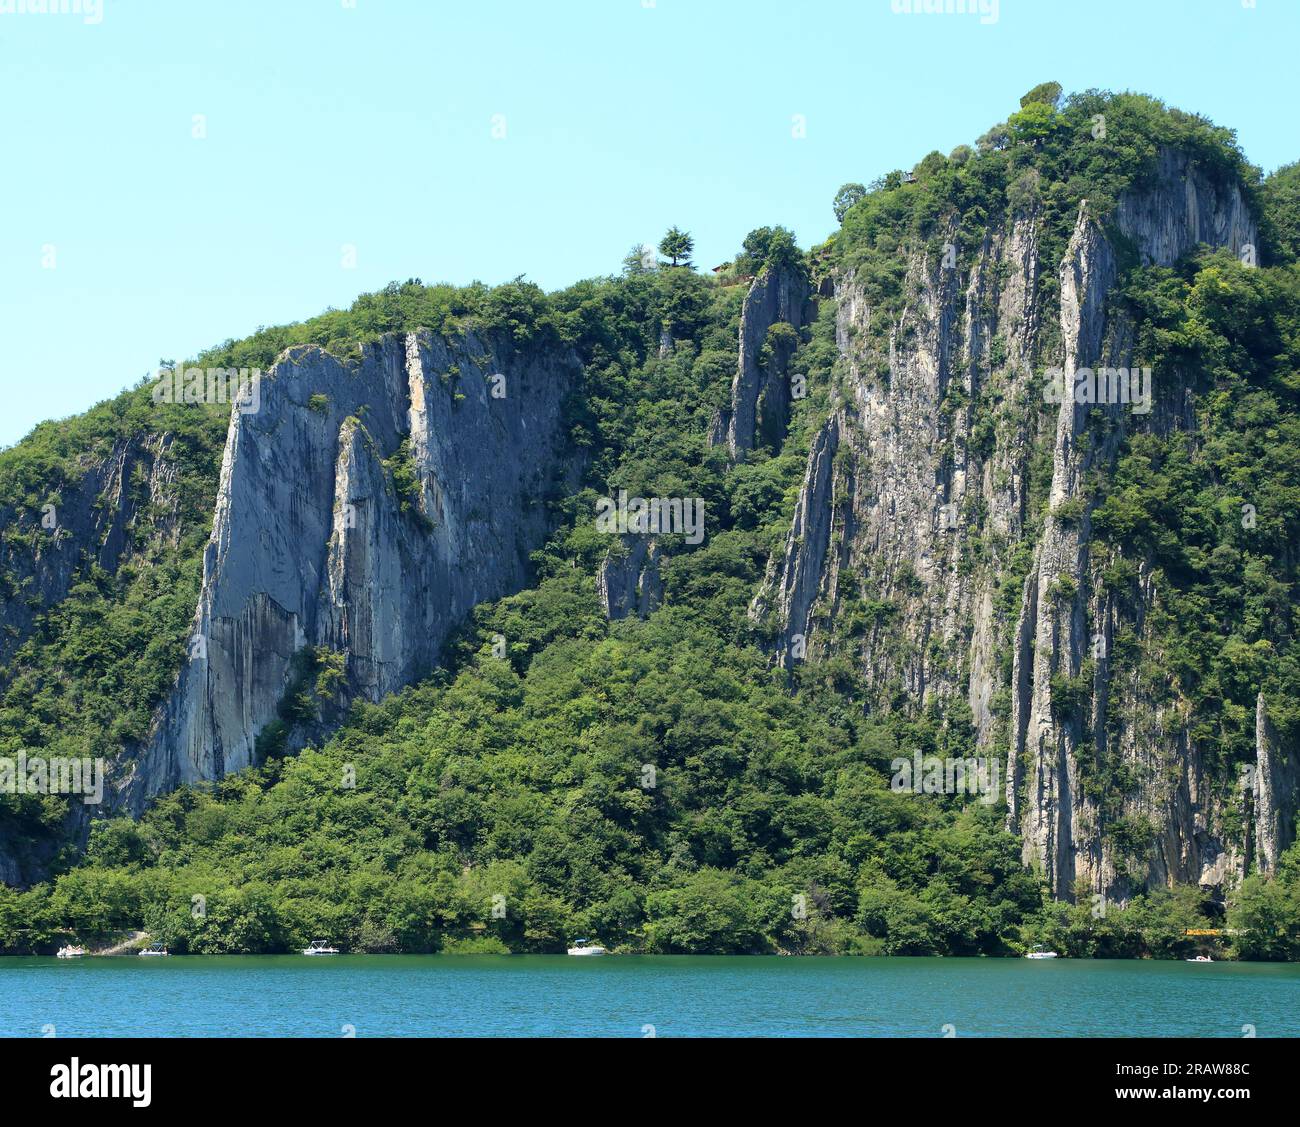 Vertical slabs of limestone at Lake Iseo, Lago d'Iseo, Iseosee, Italy. Geological rock formation Stock Photo